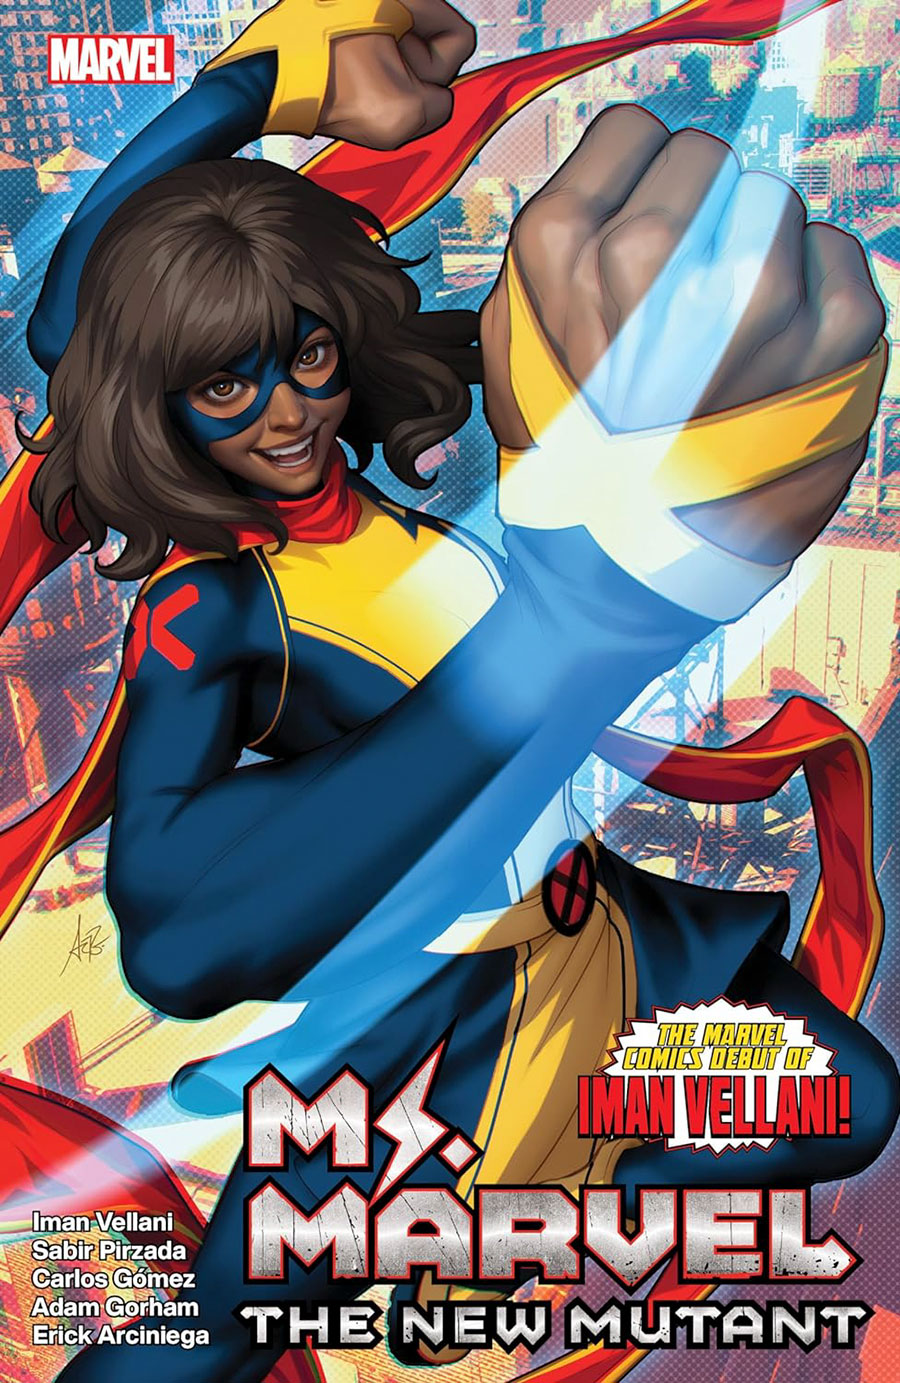 Ms Marvel The New Mutant TP